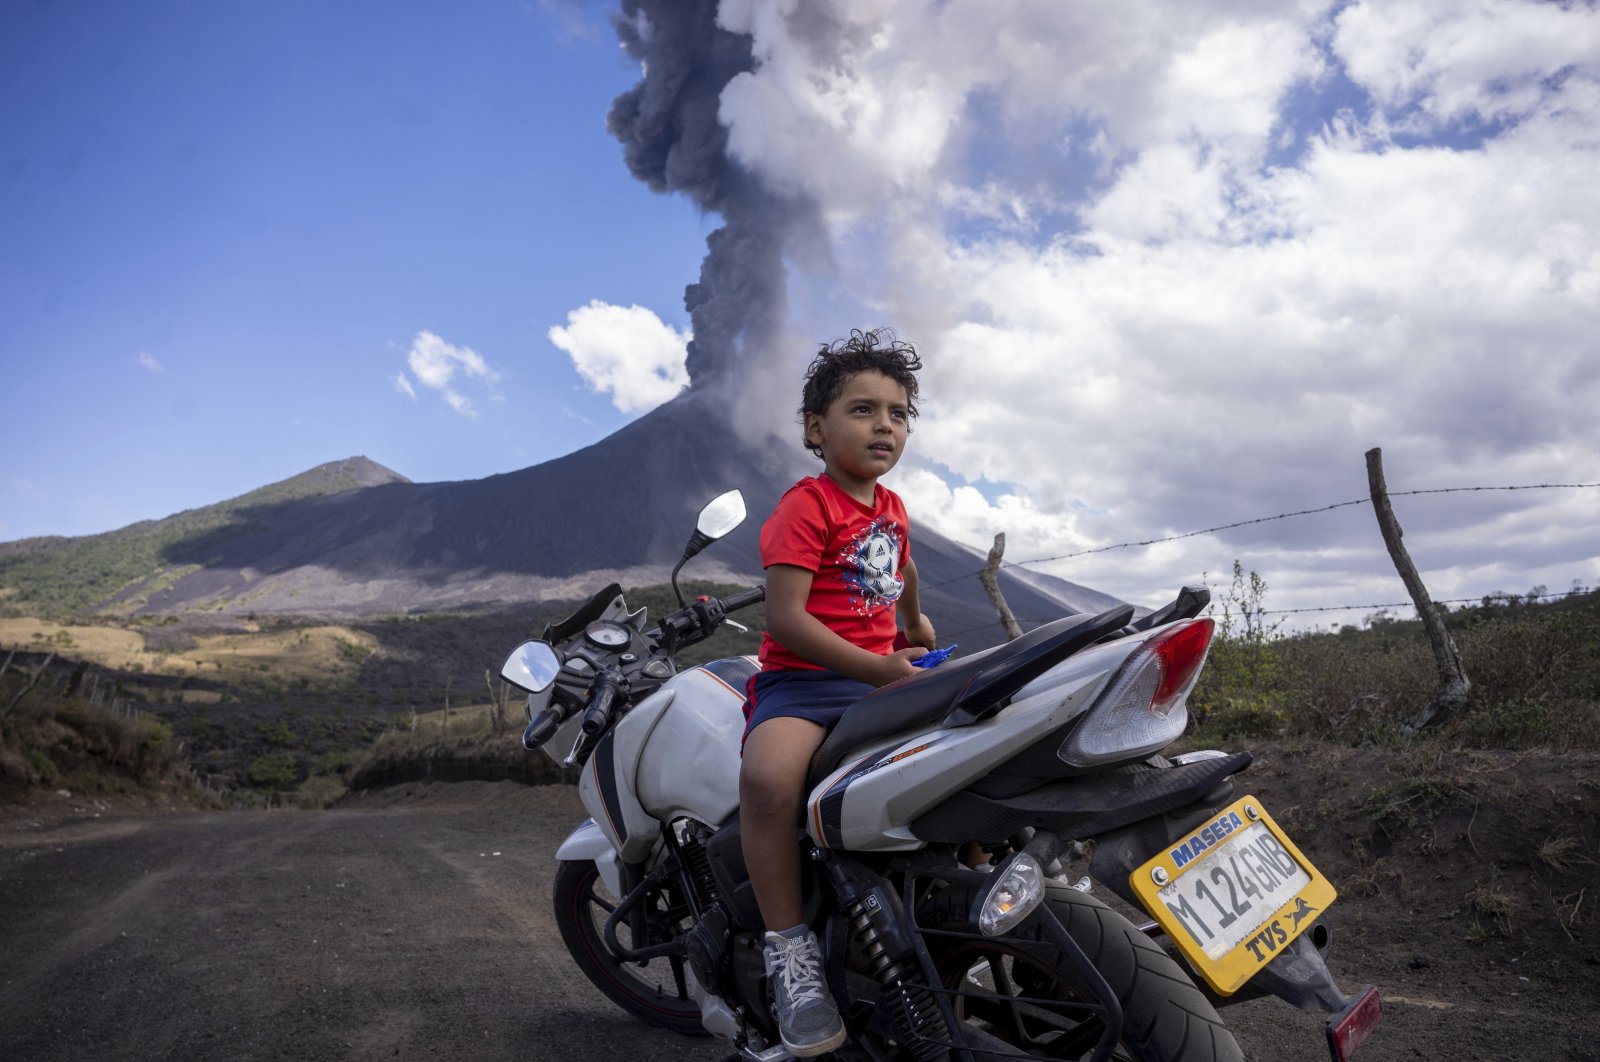 A child sits on a motorcycle as the Pacaya volcano erupts in the background, viewed from San Vicente Pacaya, Guatemala, March 3, 2021. (AP Photo)